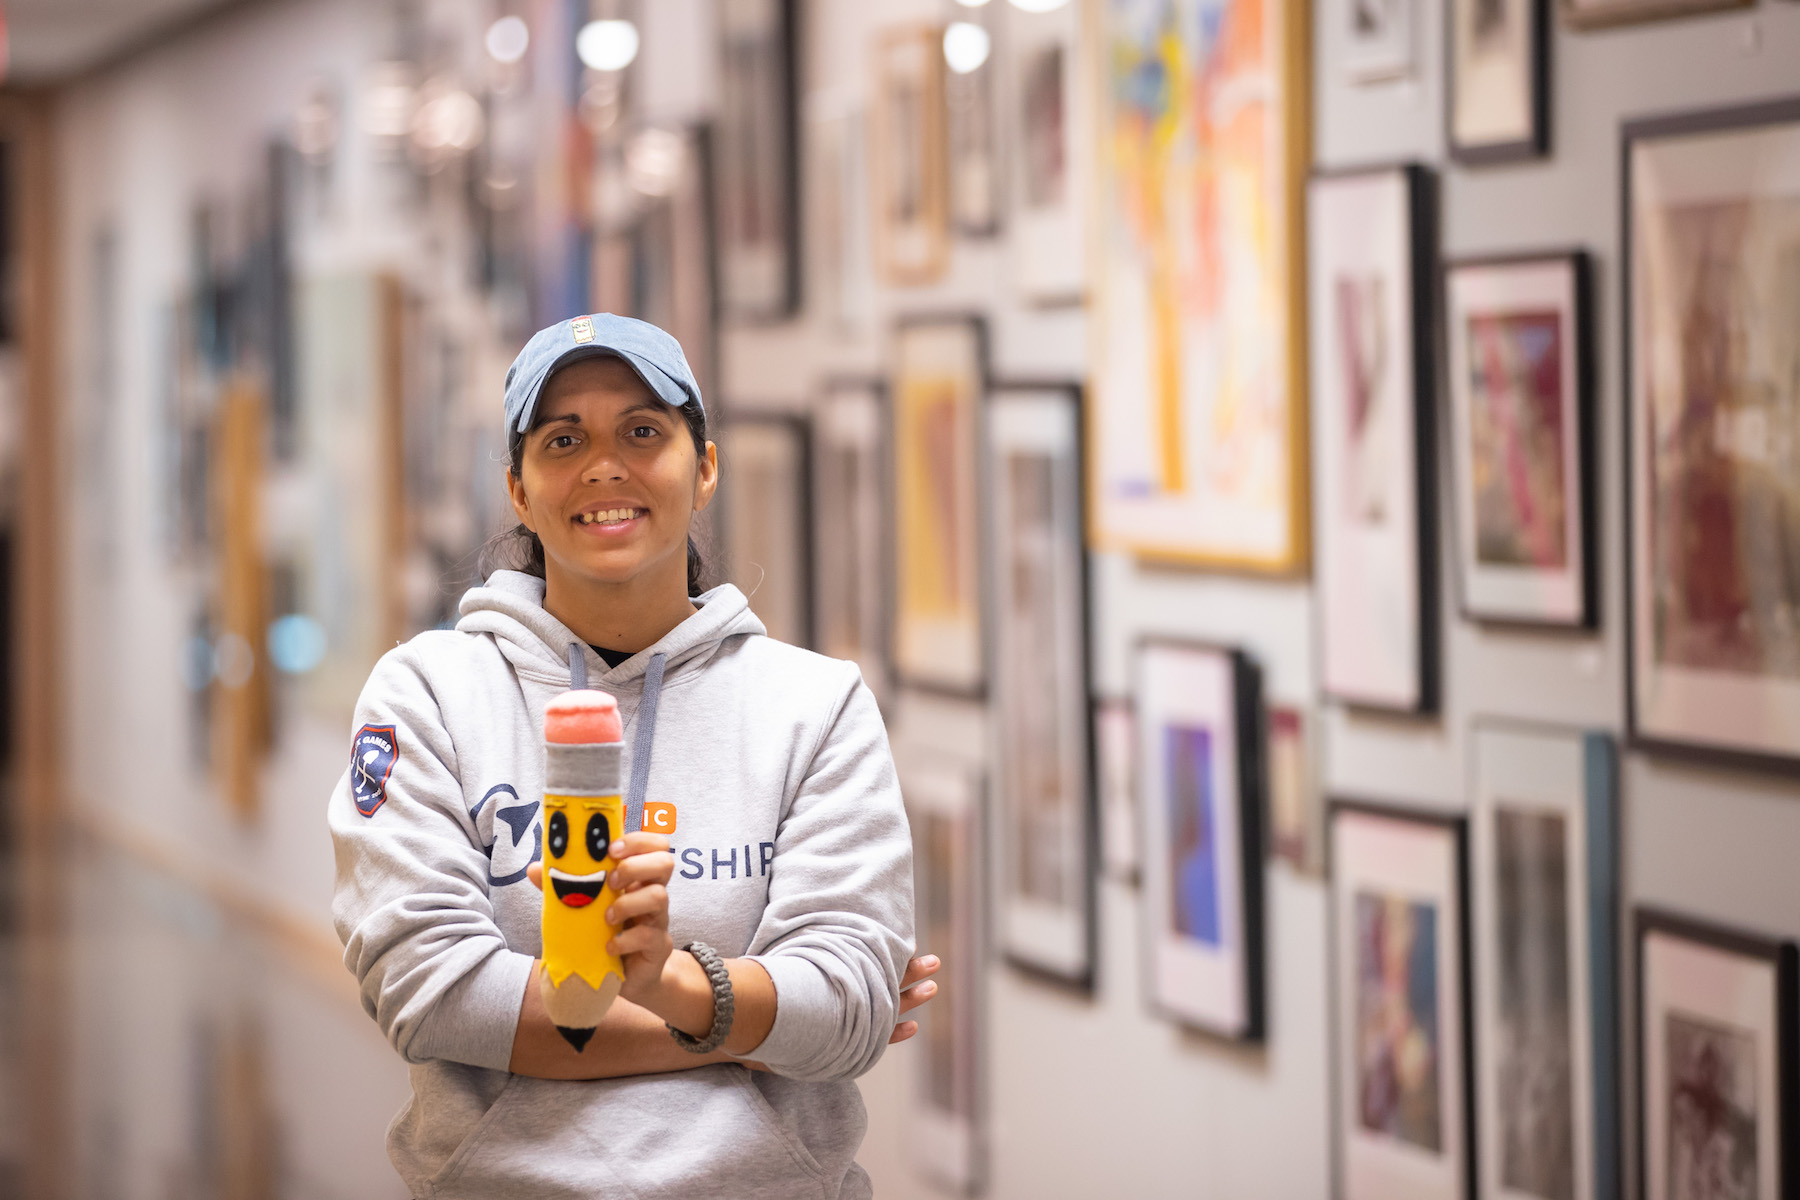 Student Spotlight: Meet Shirley Layer, an APSU art student whose ‘sketch’ keeps turning up success